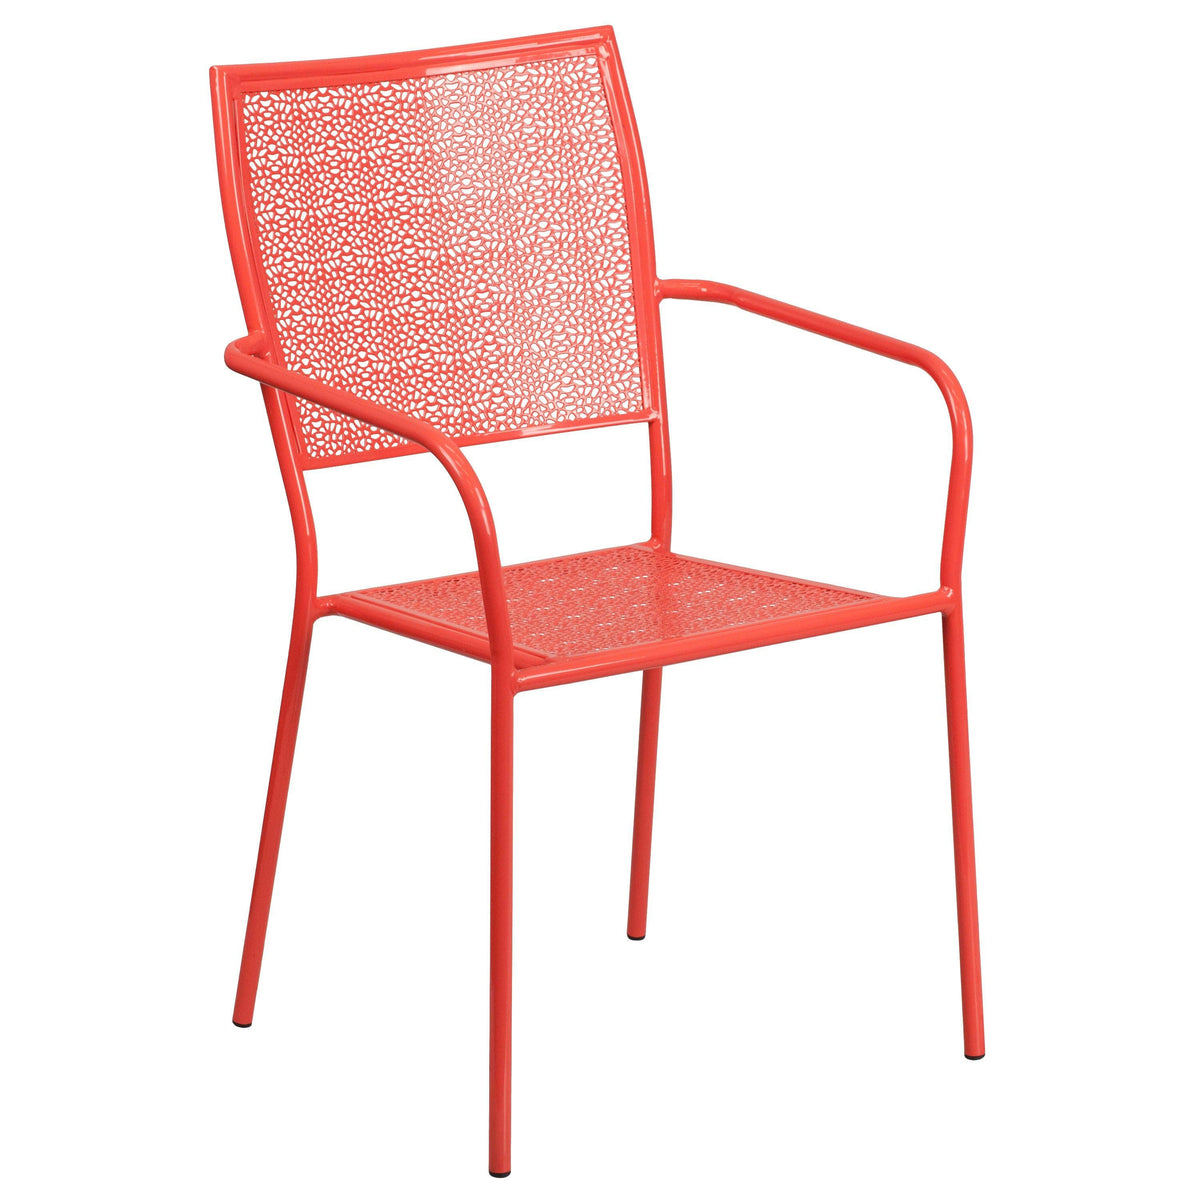 Coral |#| 28inch Square Coral Indoor-Outdoor Steel Patio Table Set with 2 Square Back Chairs